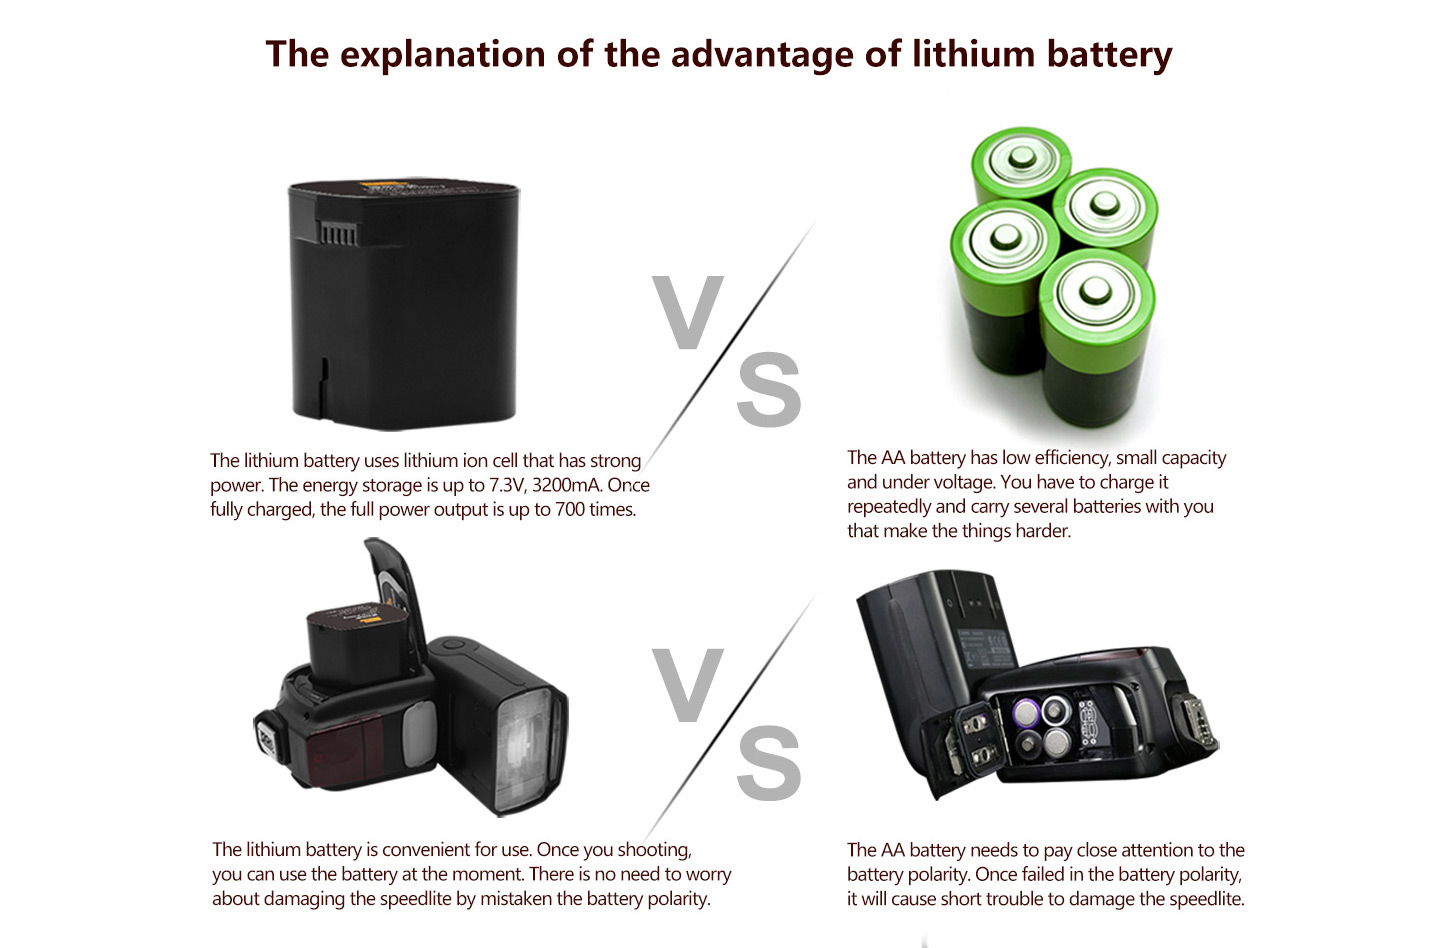 The explanation of the advantage of lithium battery